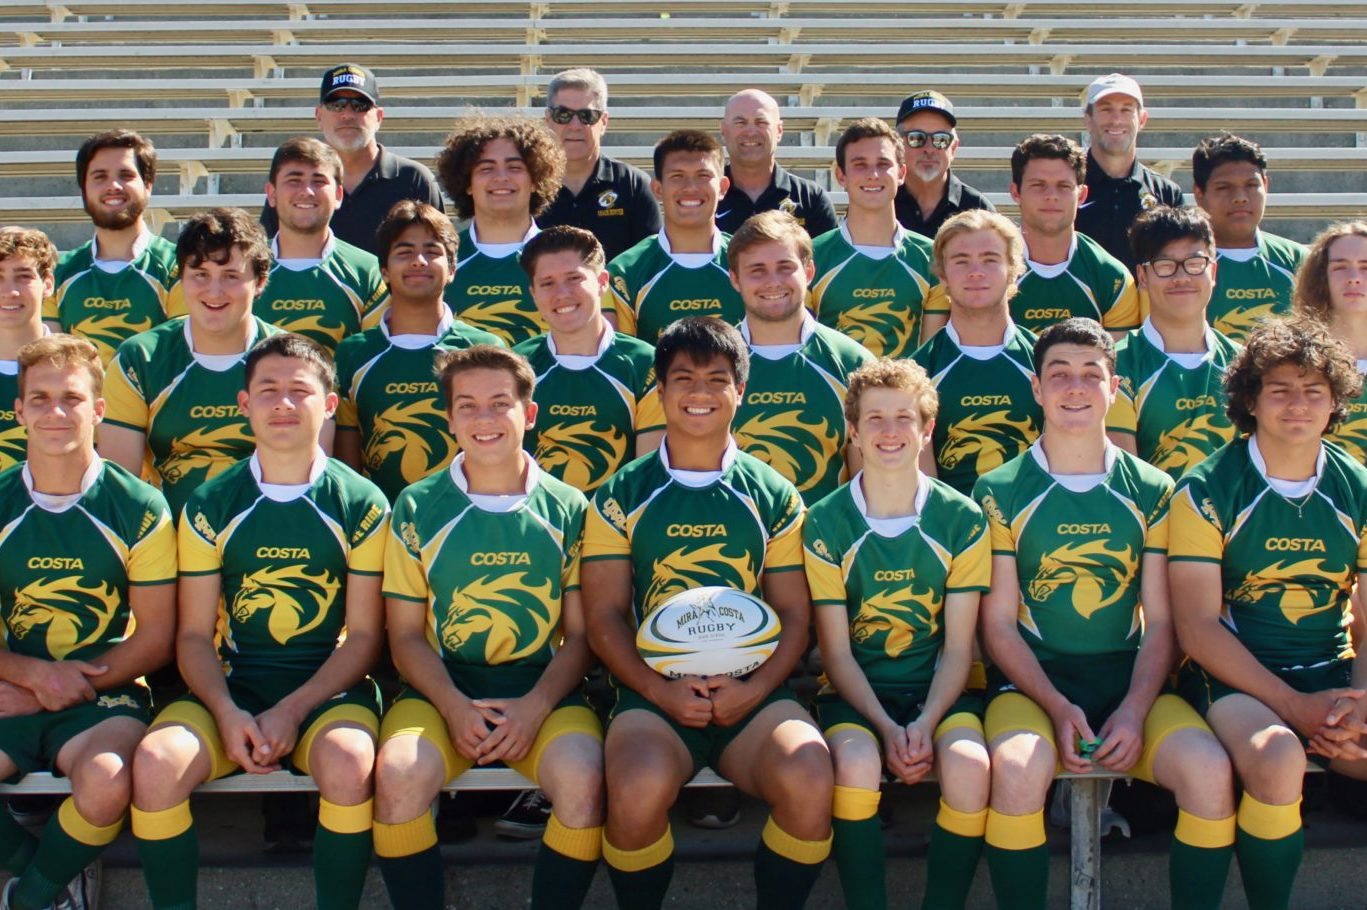 https://www.costarugby.com/wp-content/uploads/2019/04/CostaRugby_BoysTeam_Yearbook2019-e1555791136525.jpg